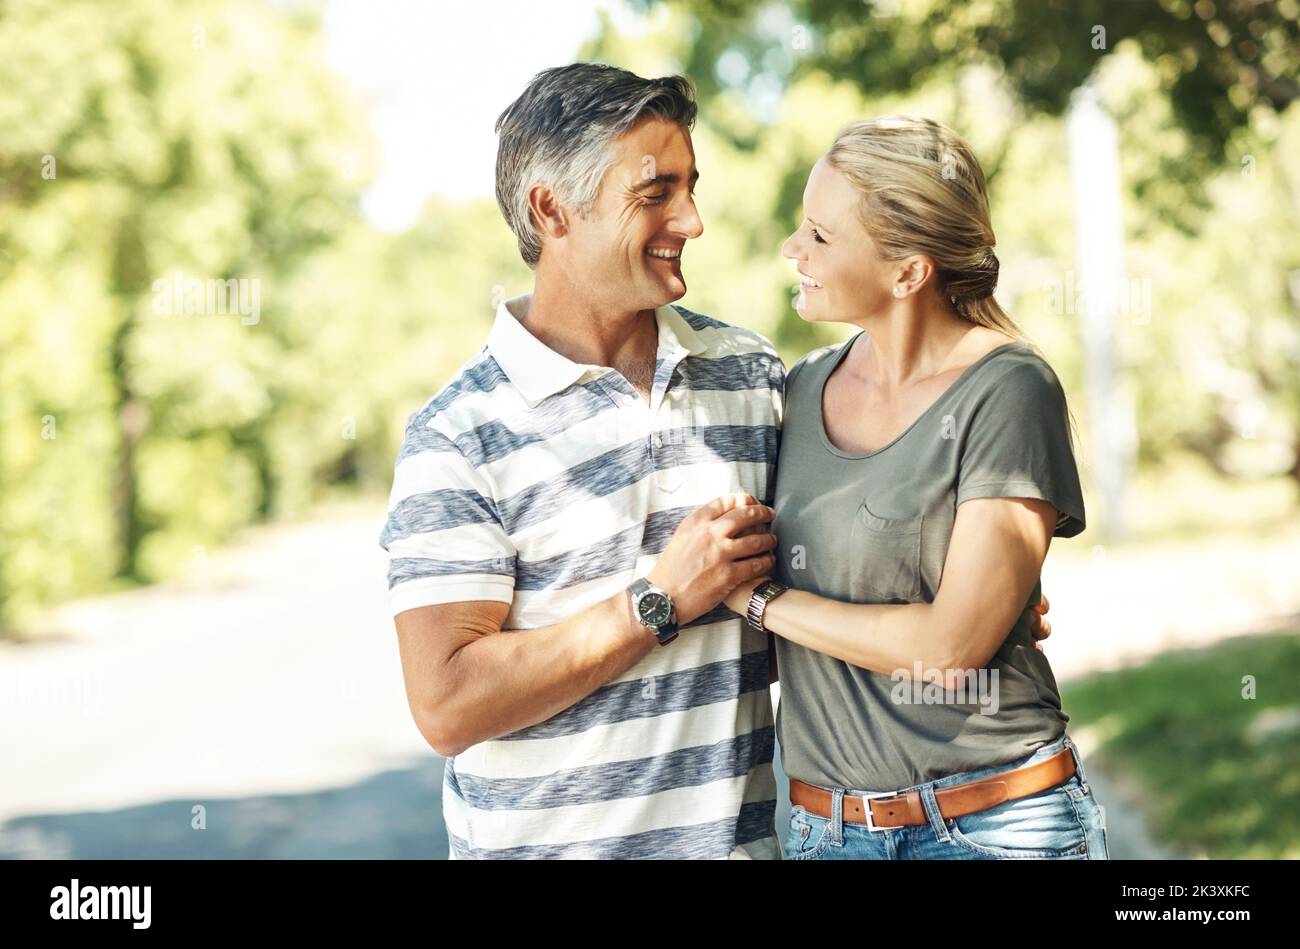 Seeing eye to eye. an affectionate mature couple enjoying a day in the park. Stock Photo